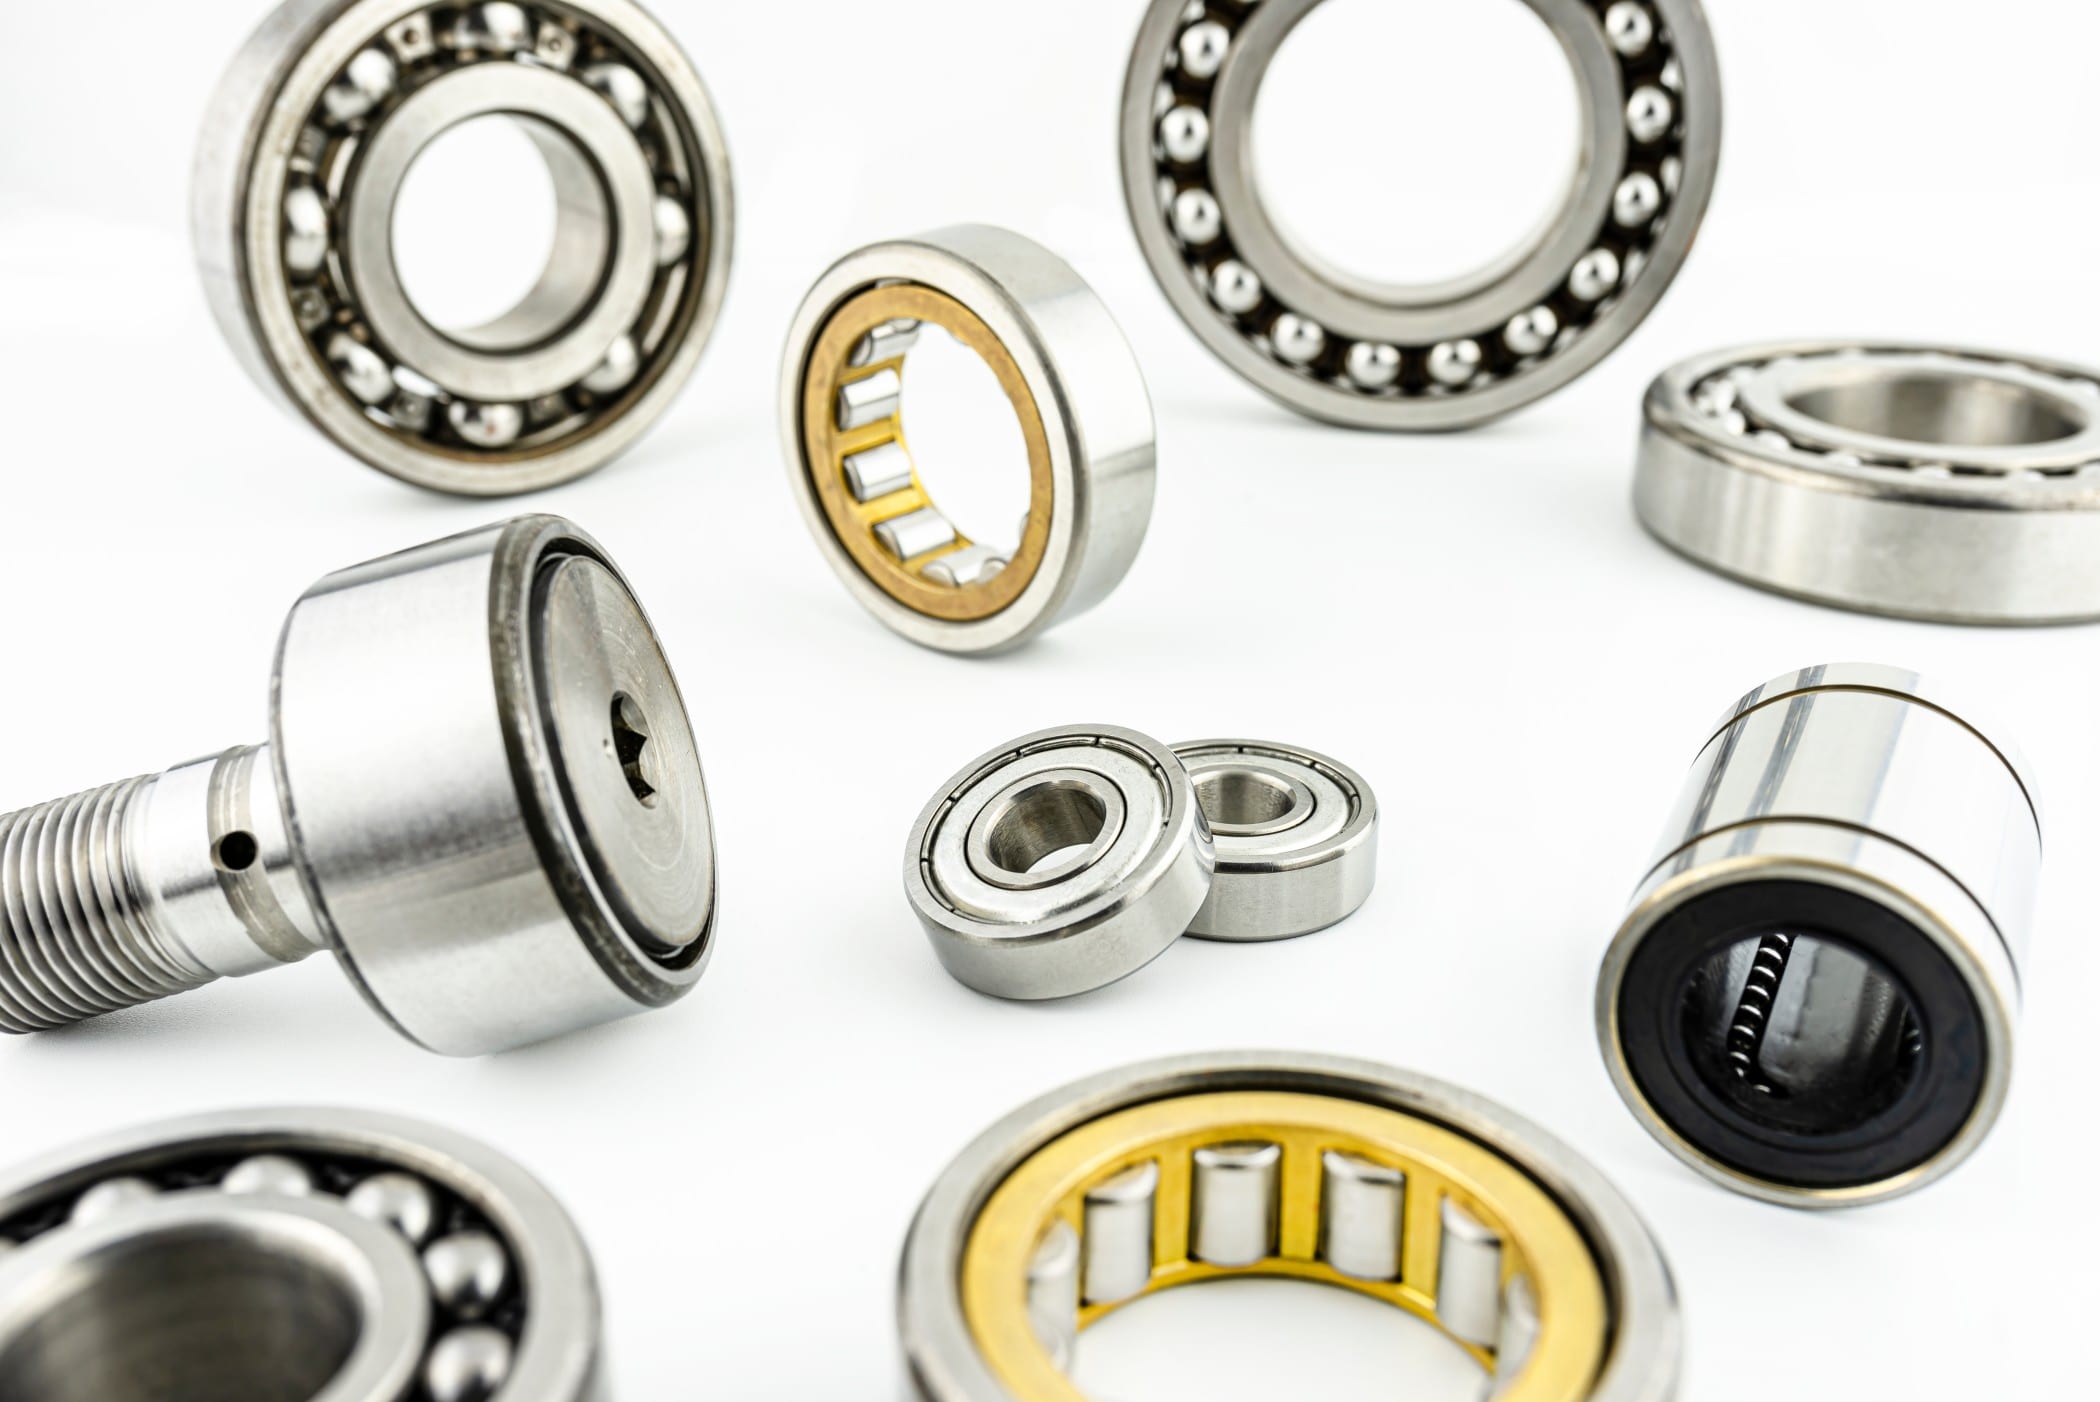 Important Factors to Consider When Choosing the Right Ball Screw Assemblies for Your Needs